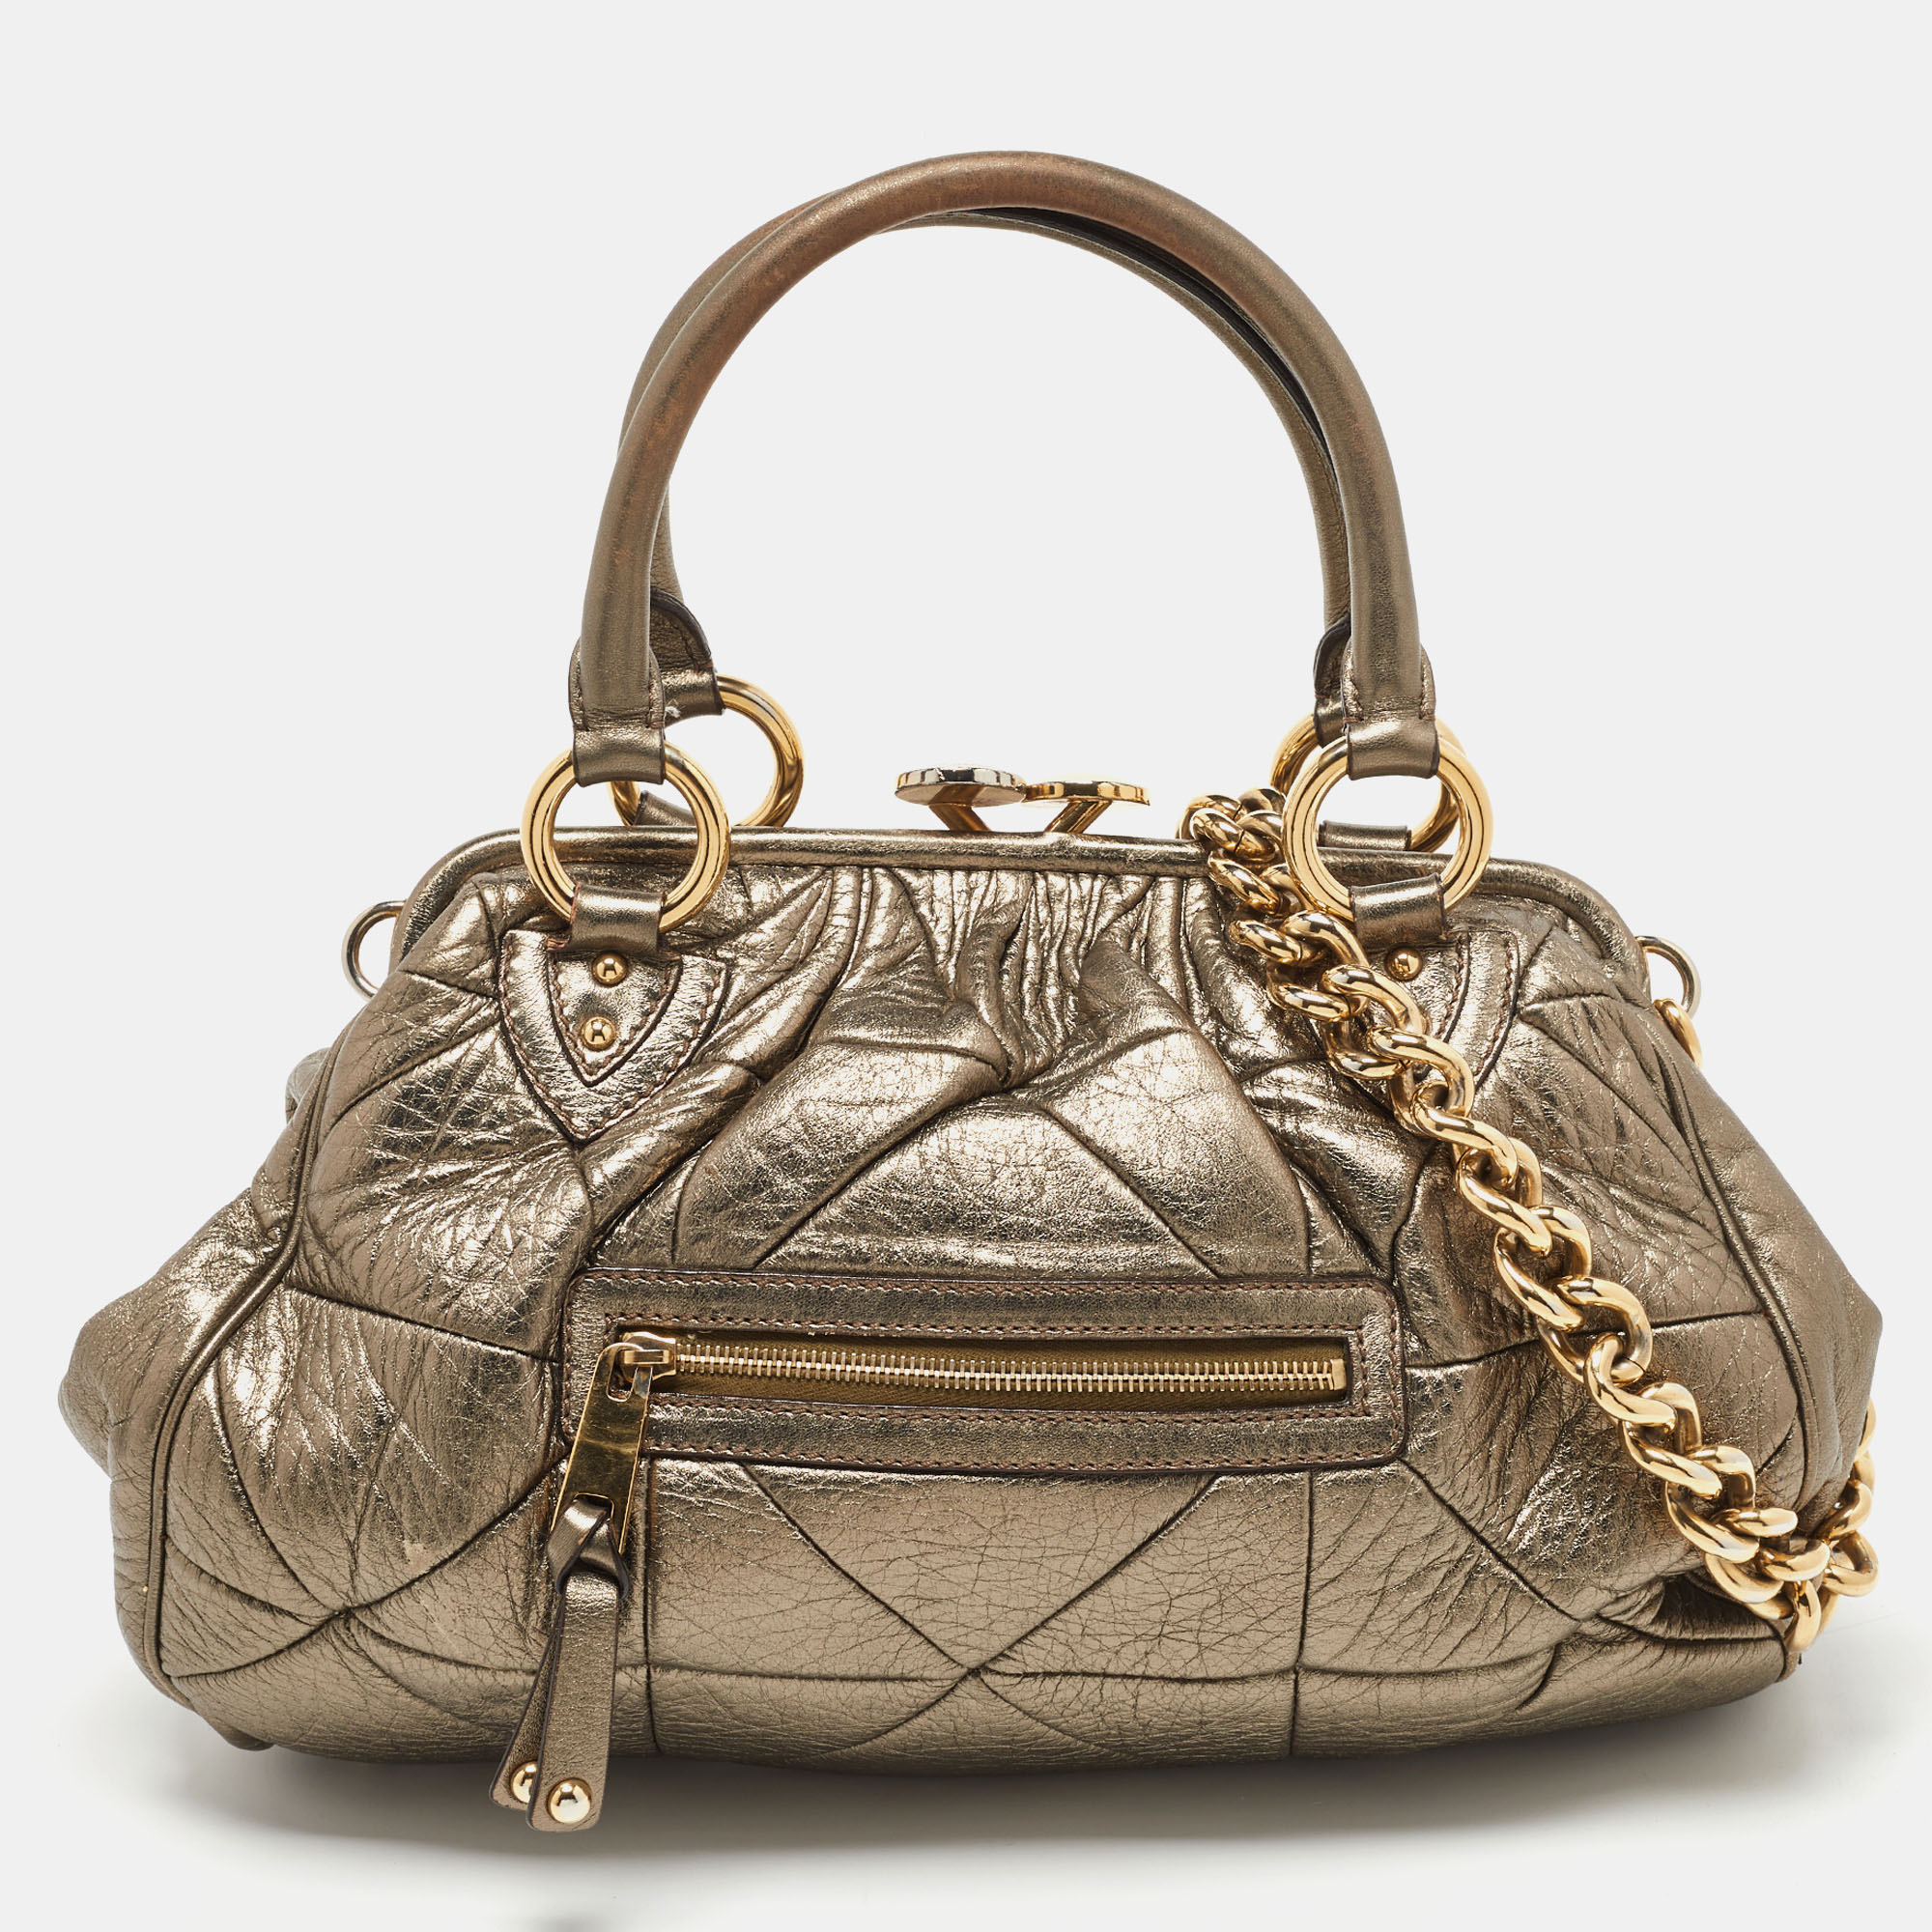 Pre-owned Marc Jacobs Gold Crinkled Leather Stam Satchel